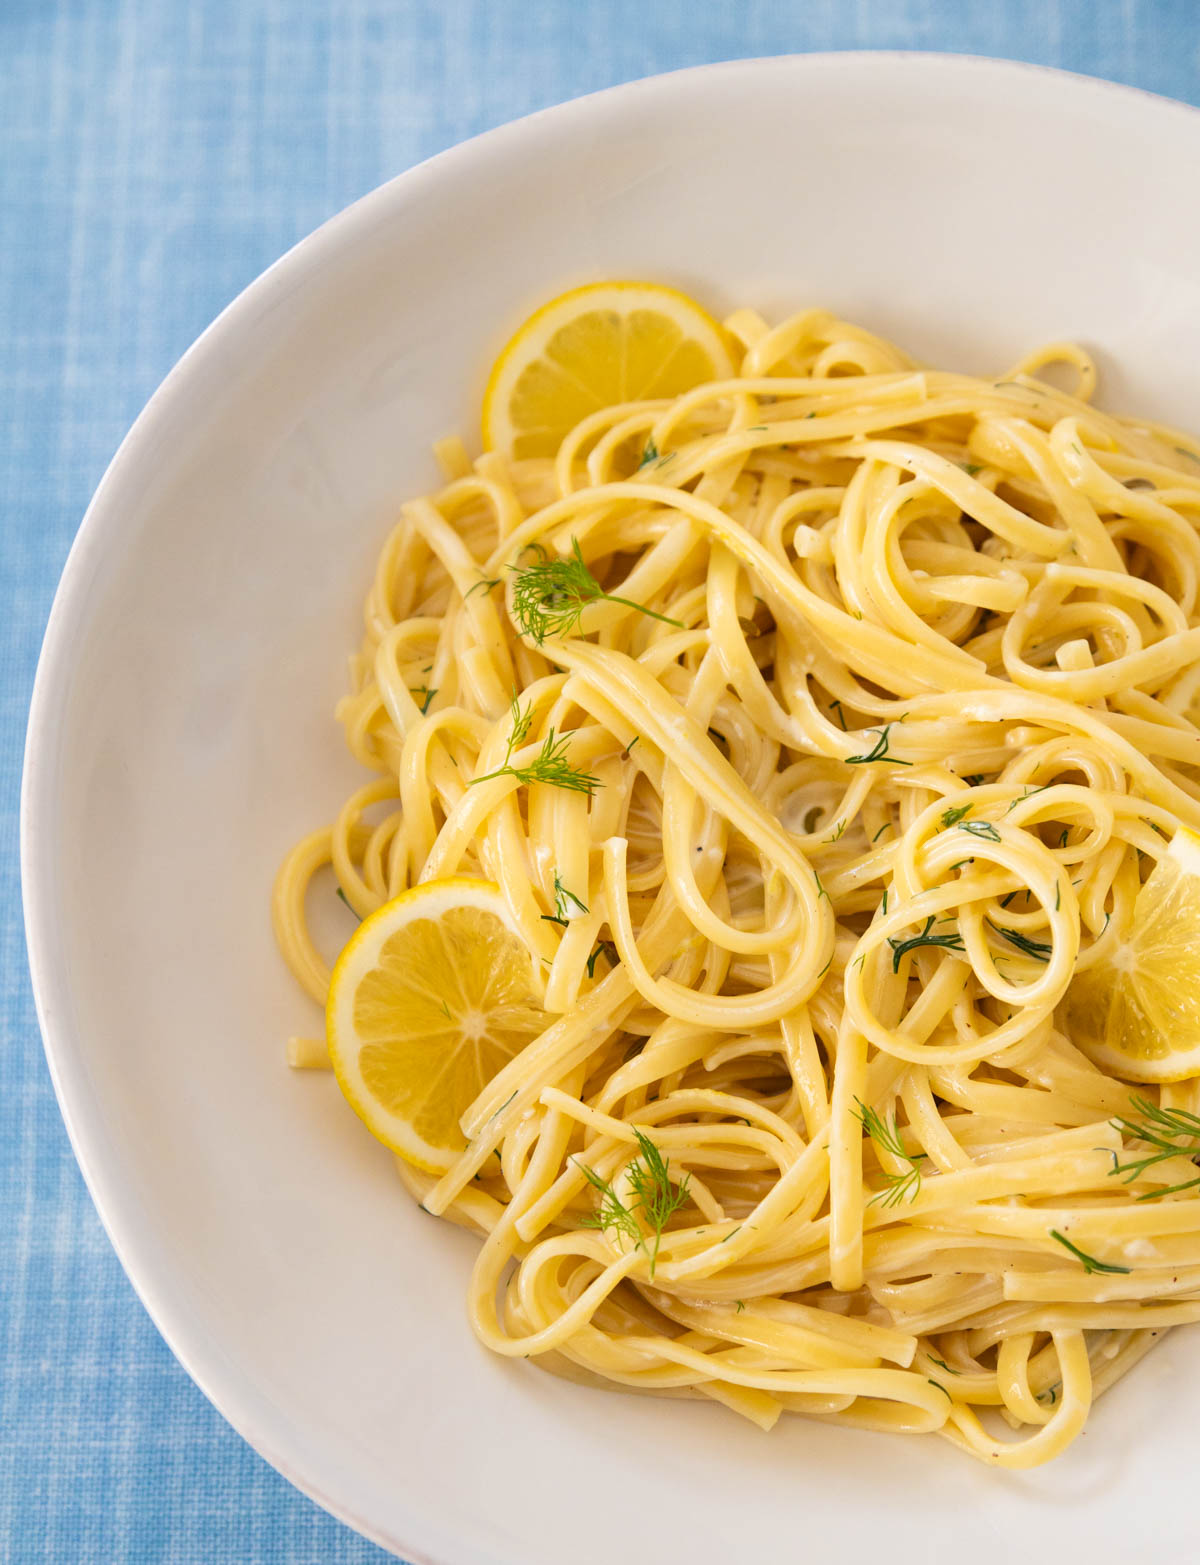 The bowl filled with creamy lemon garlic pasta has fresh dill for garnish and a few sliced lemons on the side.